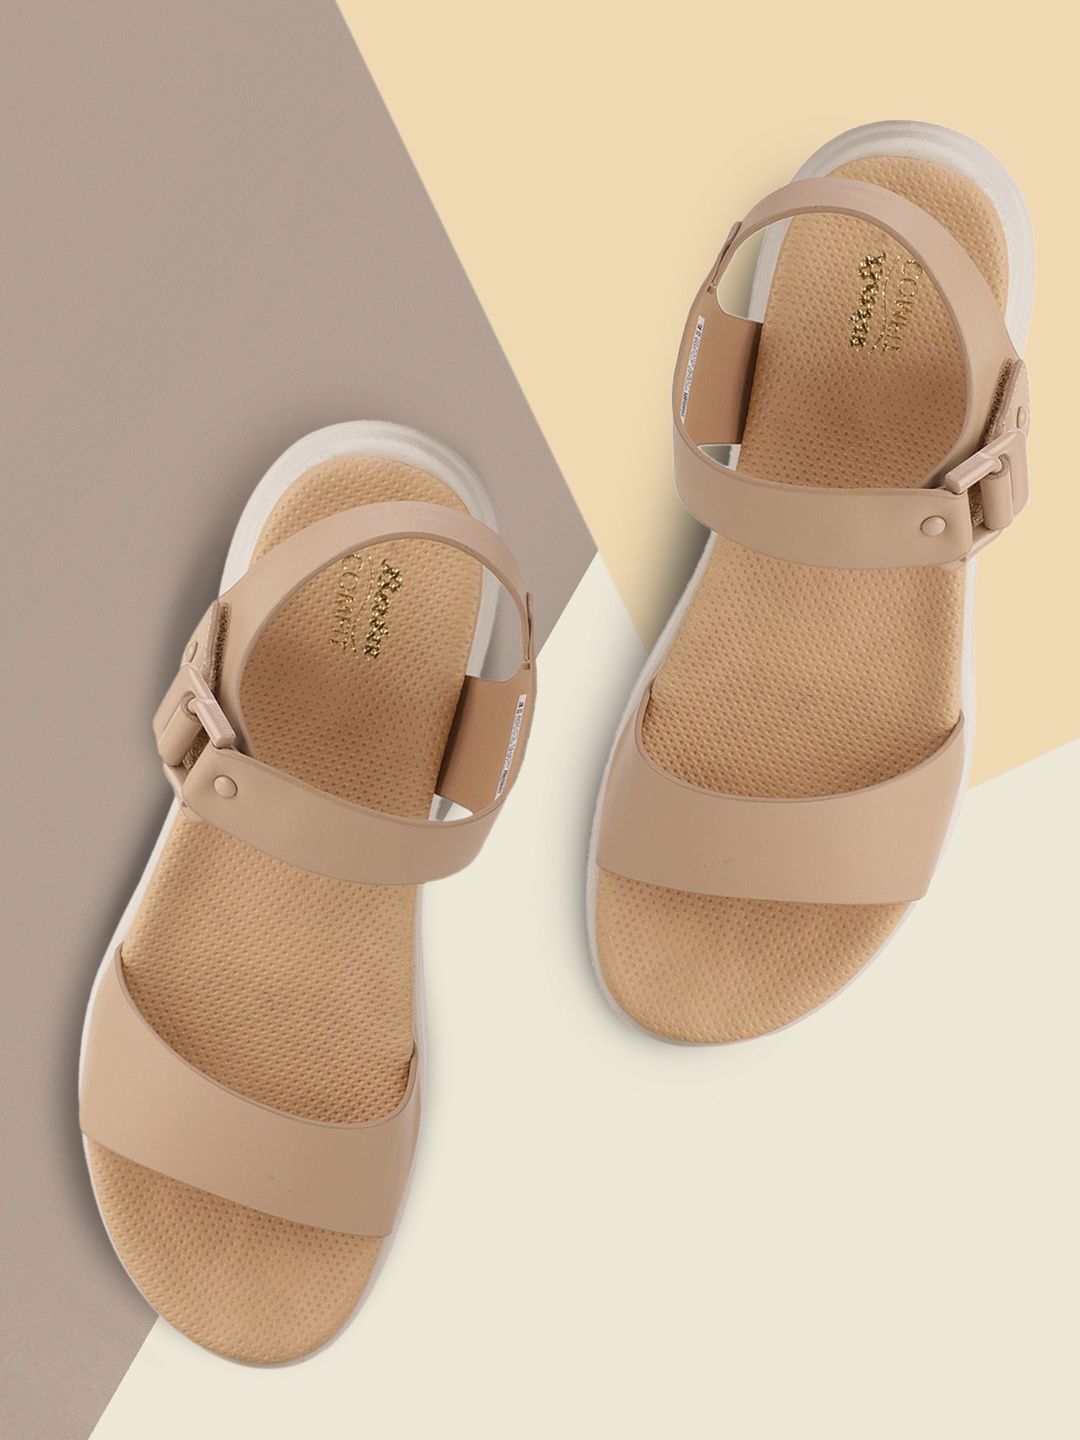 Bata Beige Wedge Sandals with Buckles Price in India